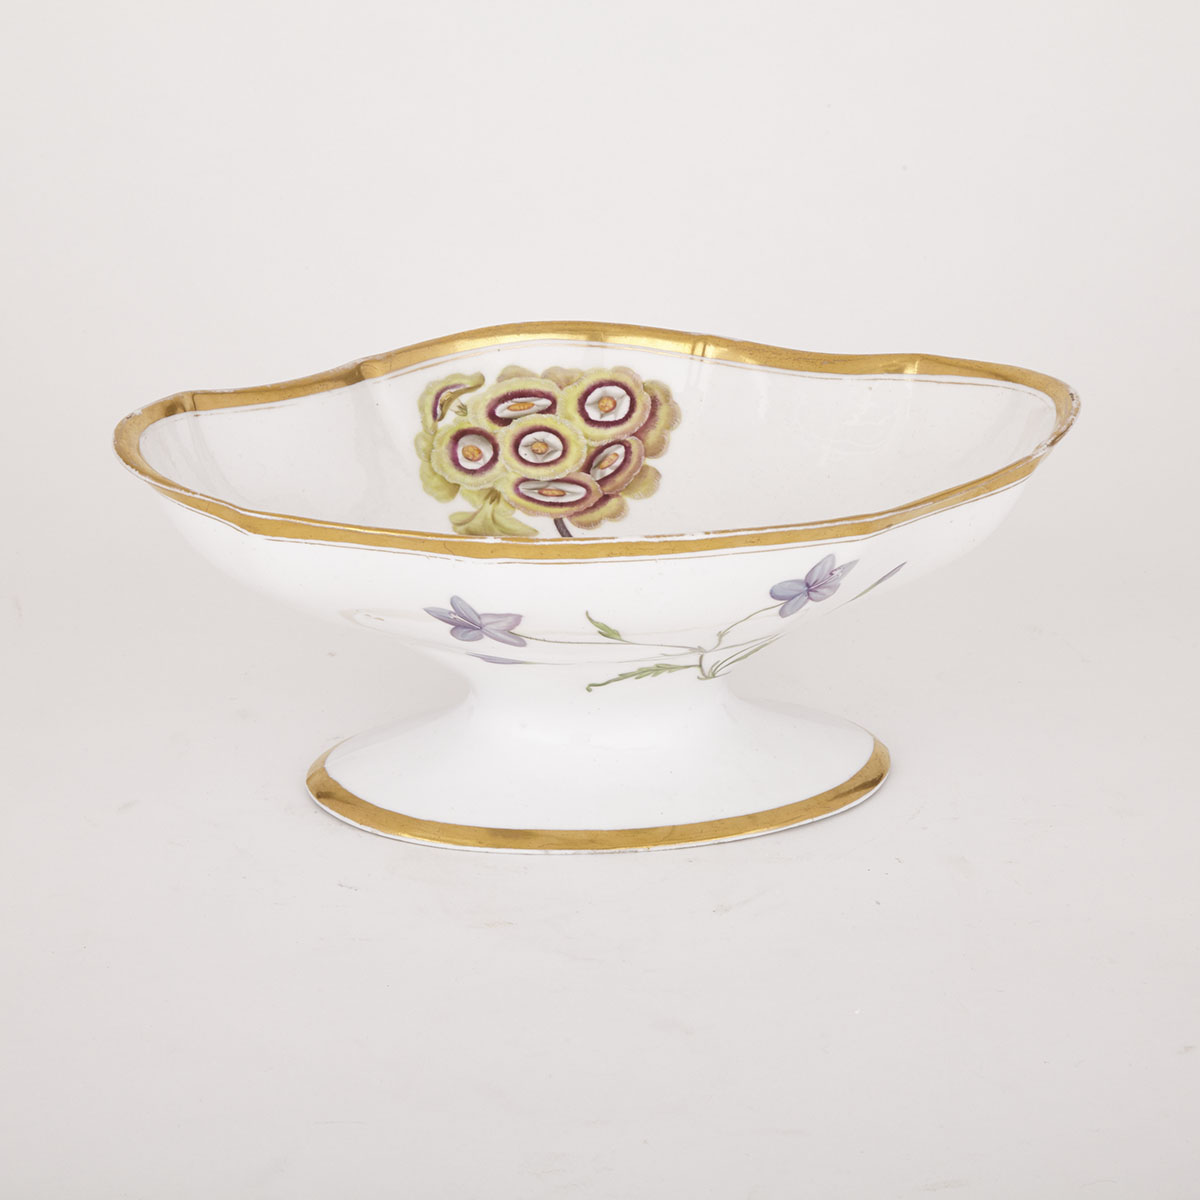 Minton Botanical Oval Footed Bowl, c.1810